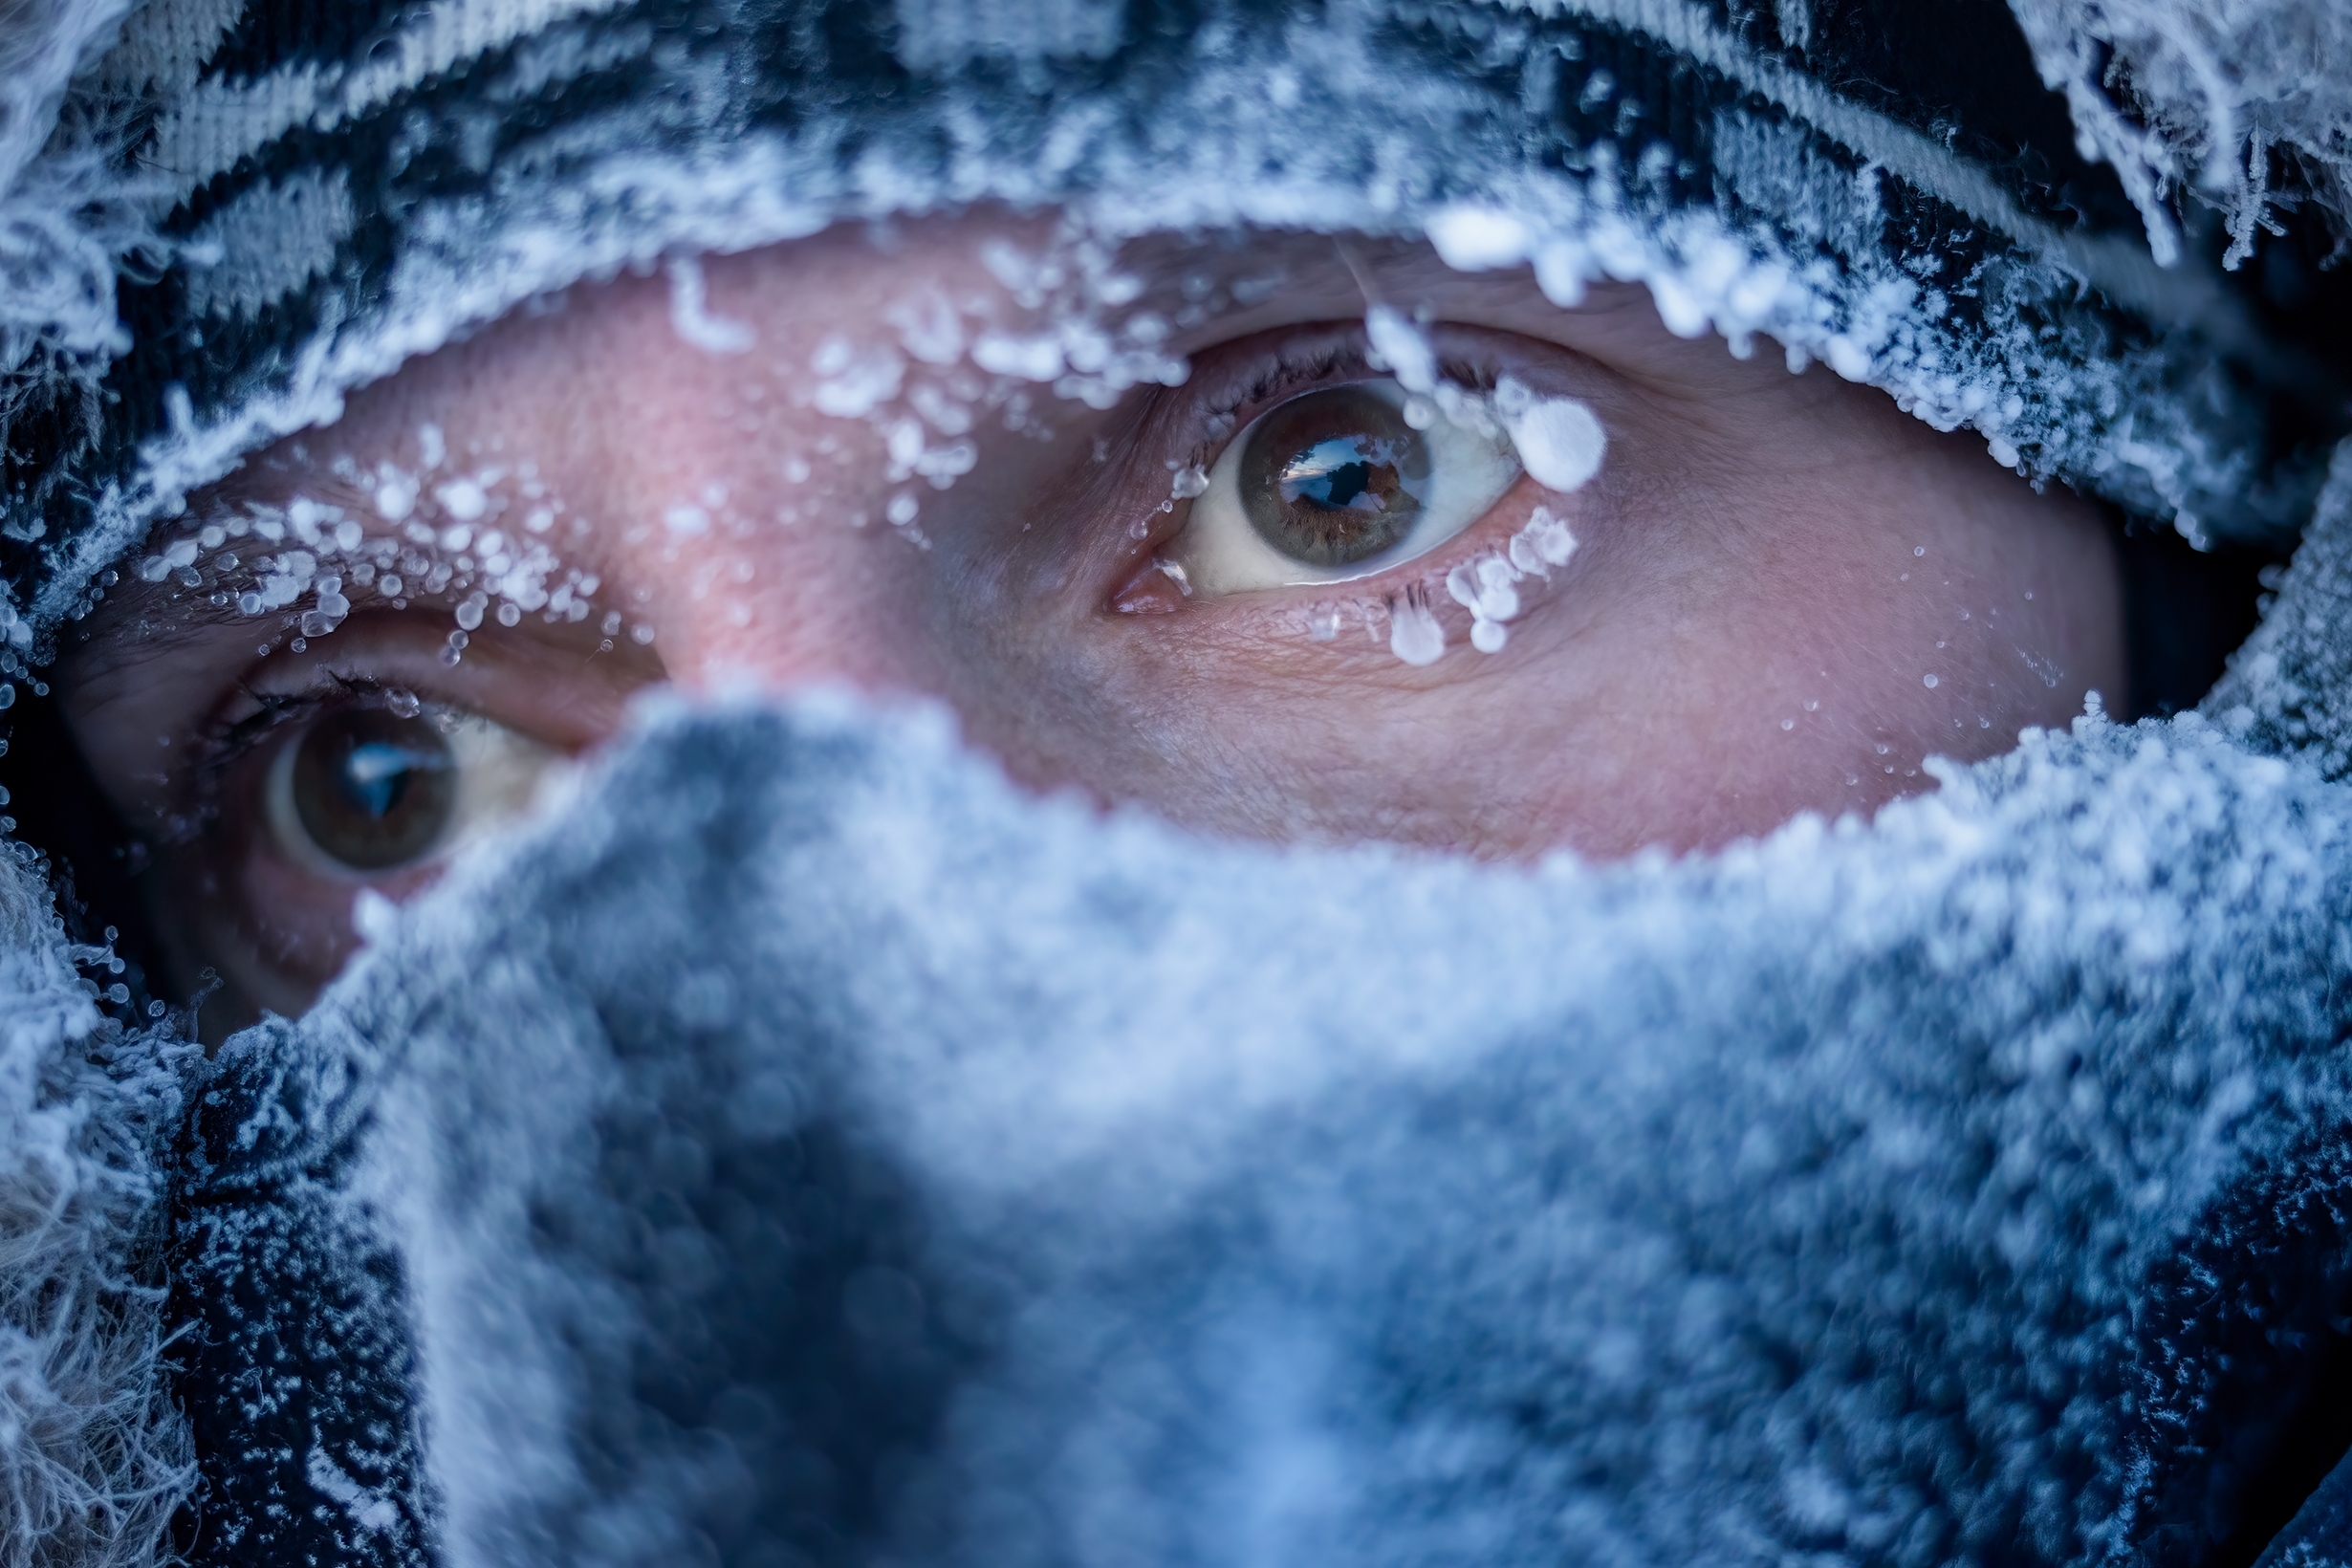 A man's masked-up face on a snowy day. | Source: Shutterstock